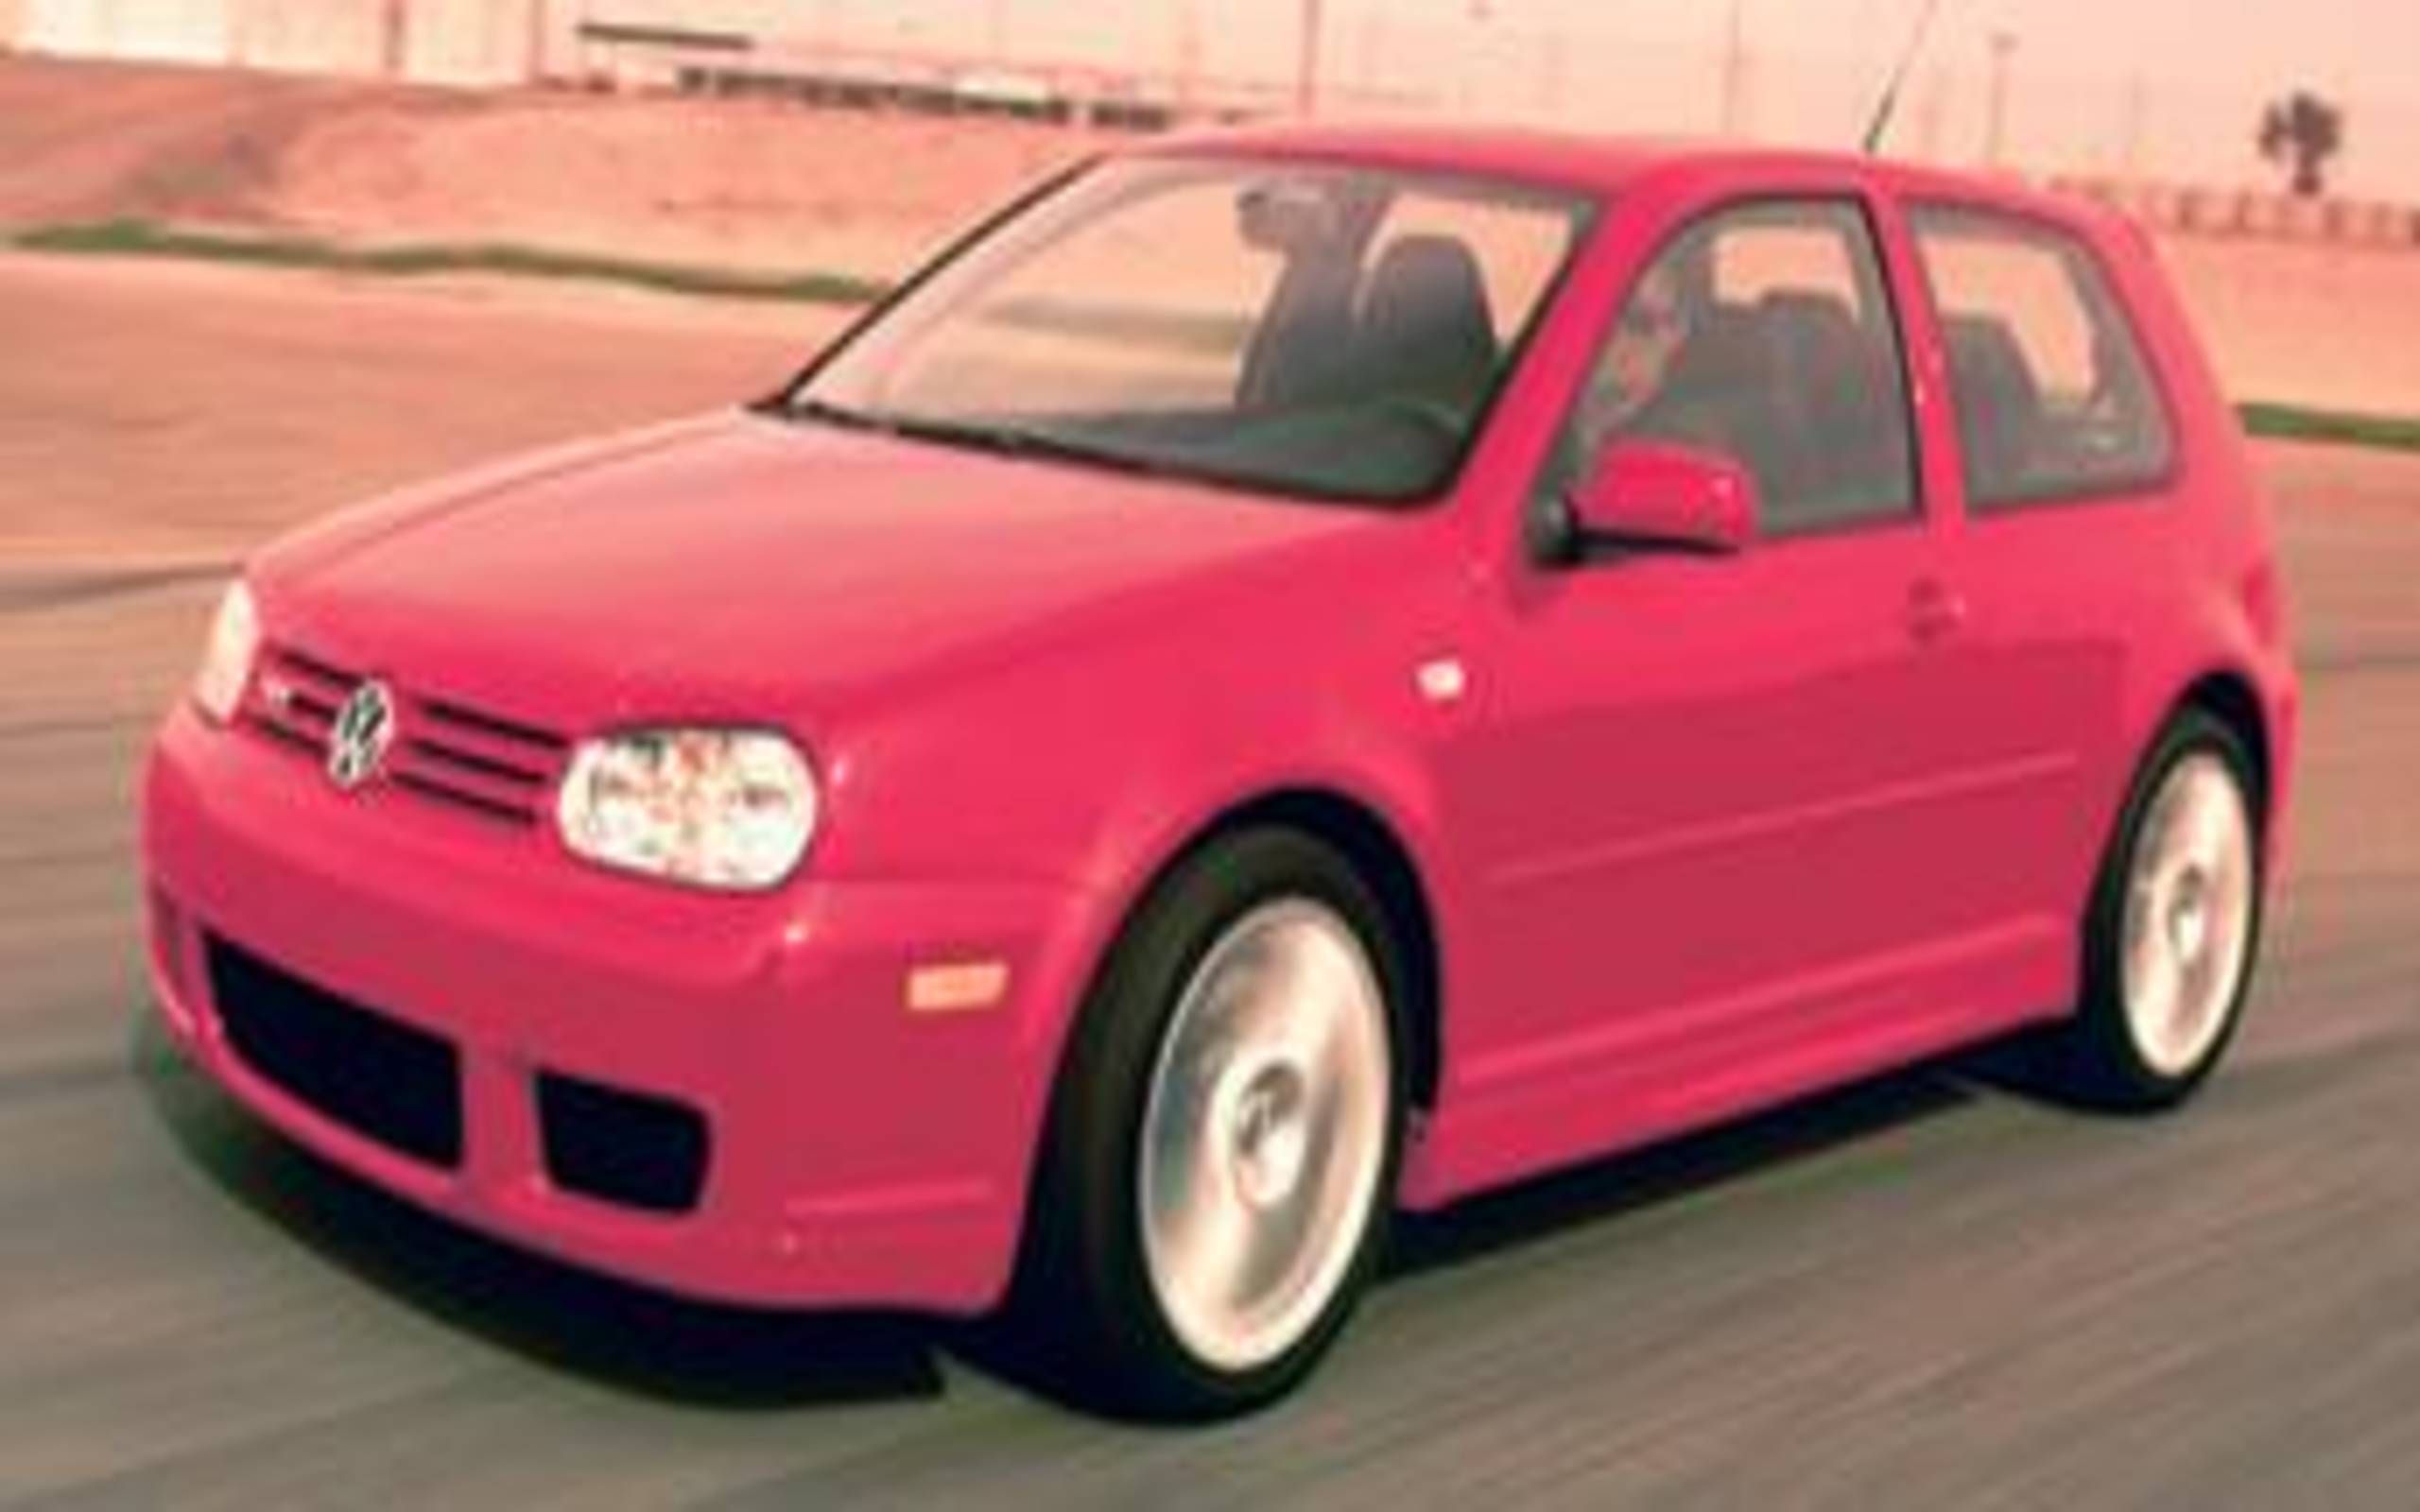 2004 Volkswagen R32: The R32 is the last, best version of VW's Golf IV